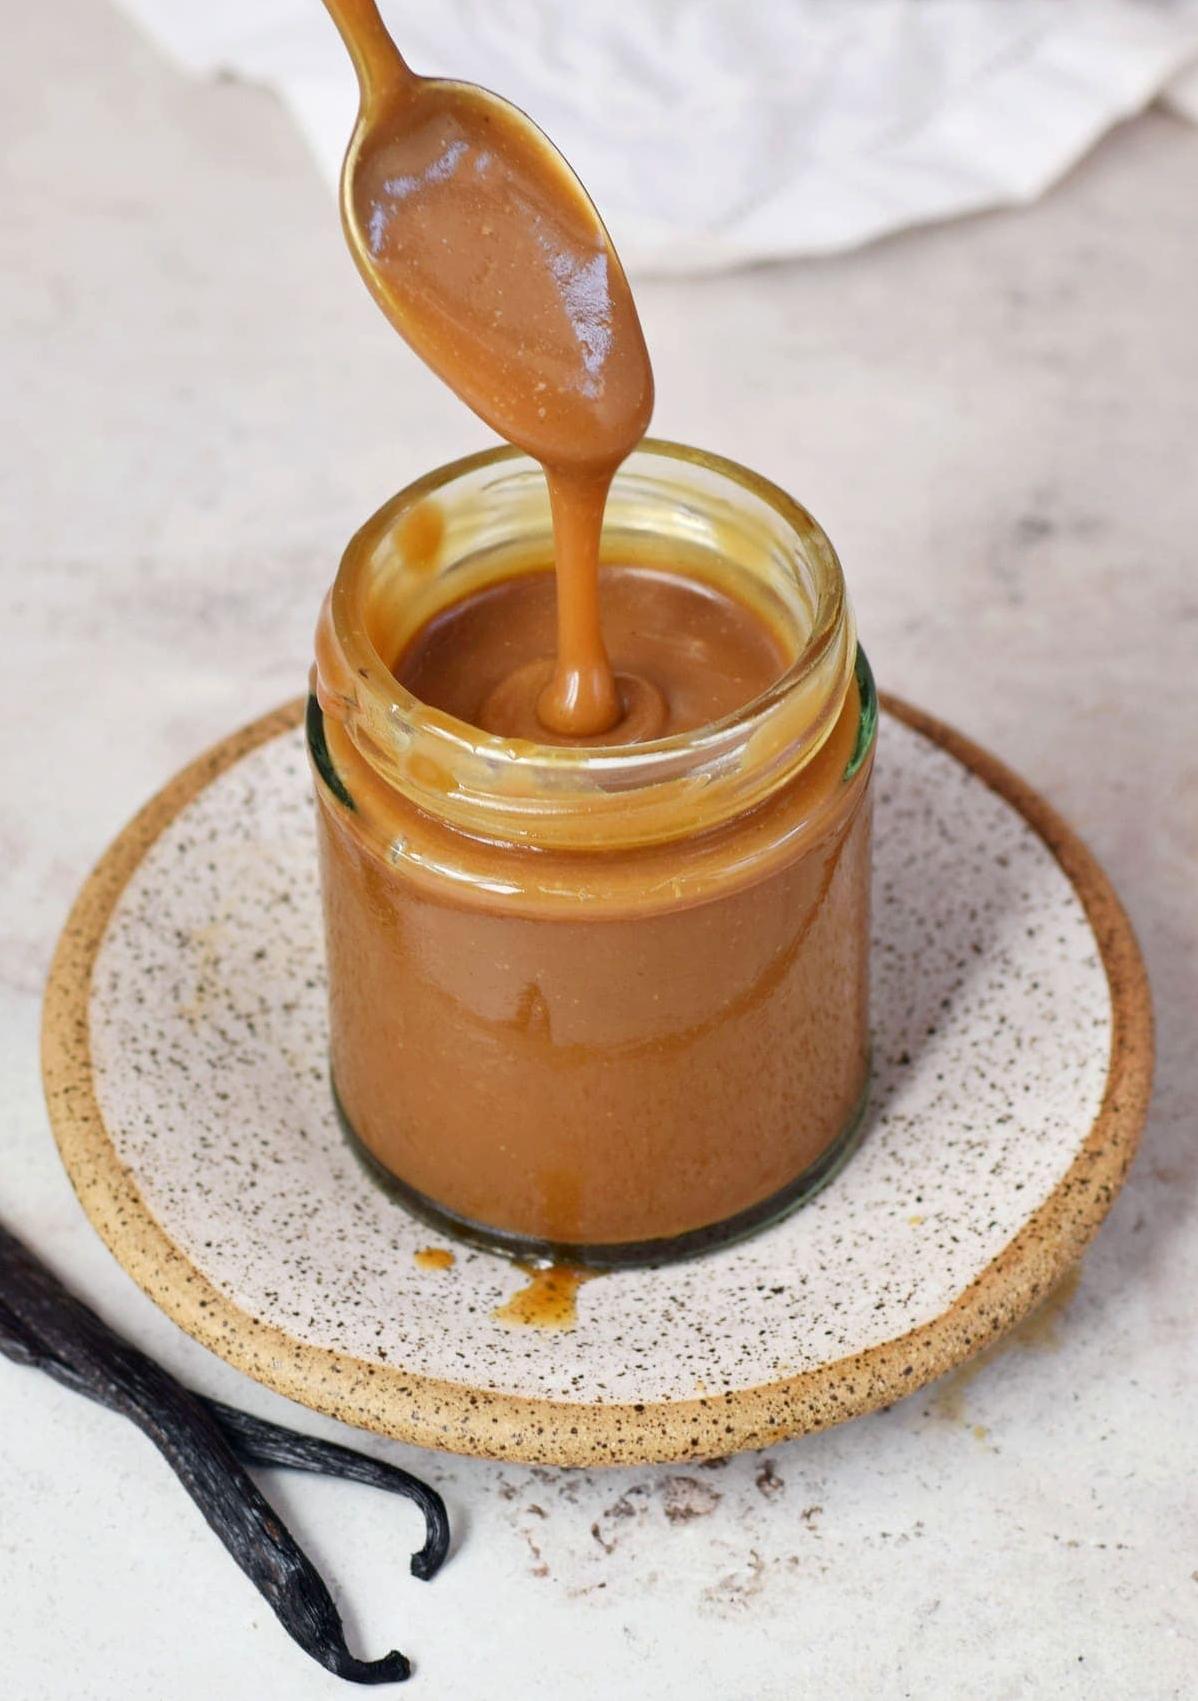  Elevate your breakfast game by pouring this vegan caramel sauce over your pancakes or waffles.